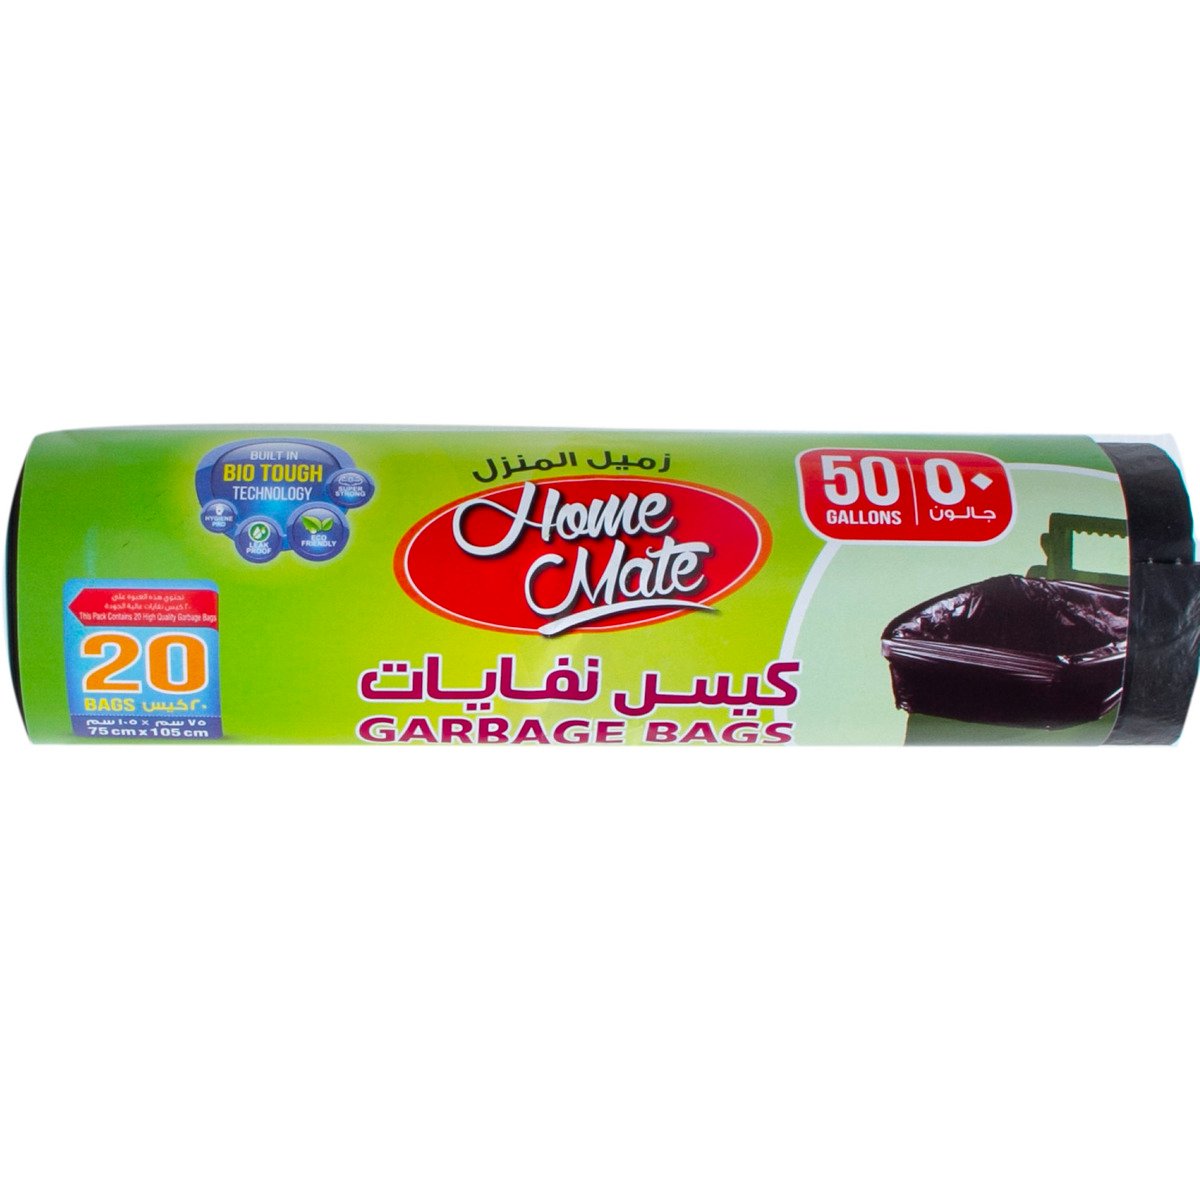 Home Mate Garbage Bags 50Gallons 75cm x 105cm 20pcs